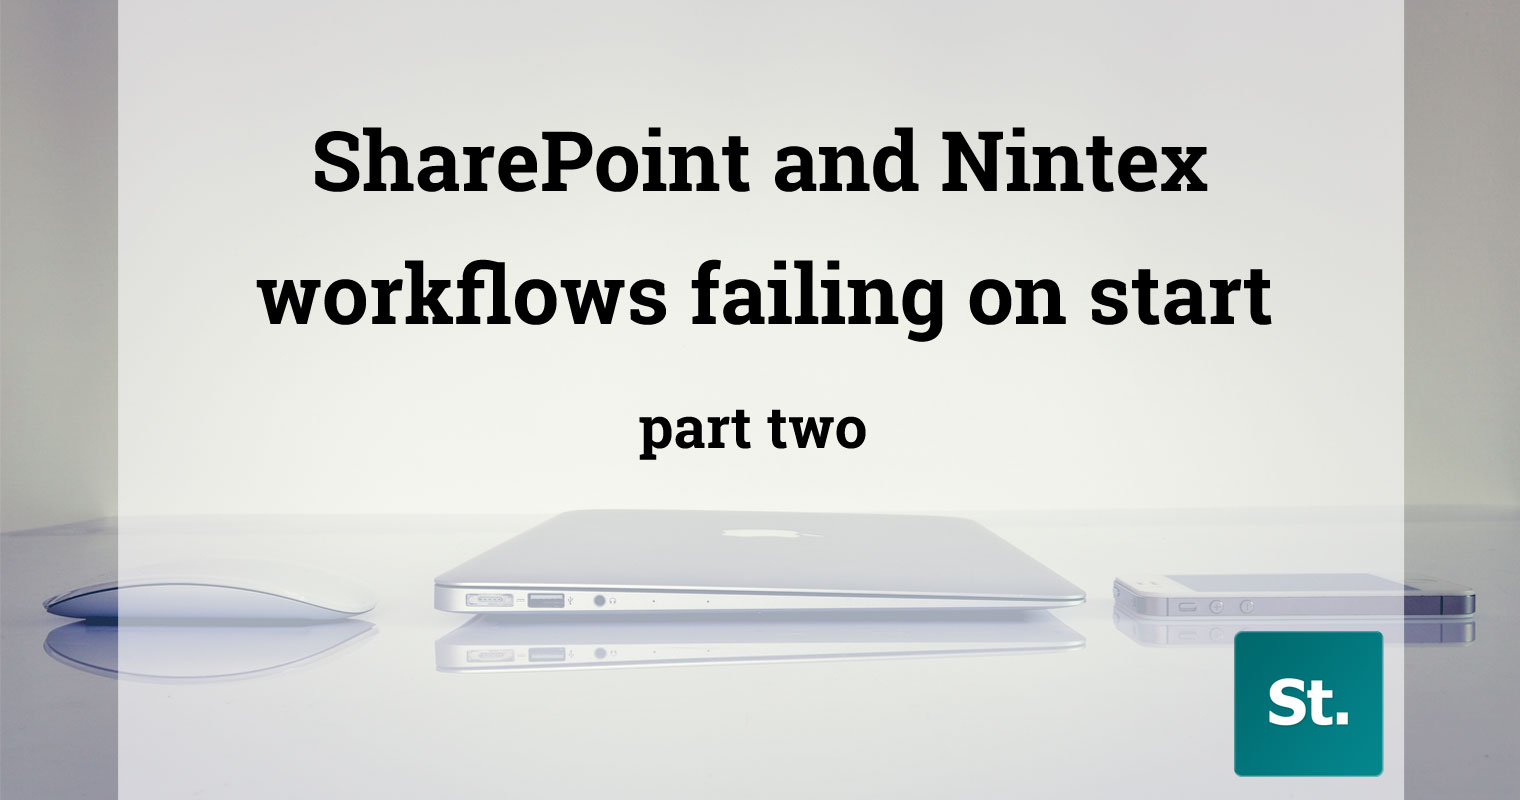 SharePoint and Nintex workflows failing on start pt.2 **FULLY RESOLVED**